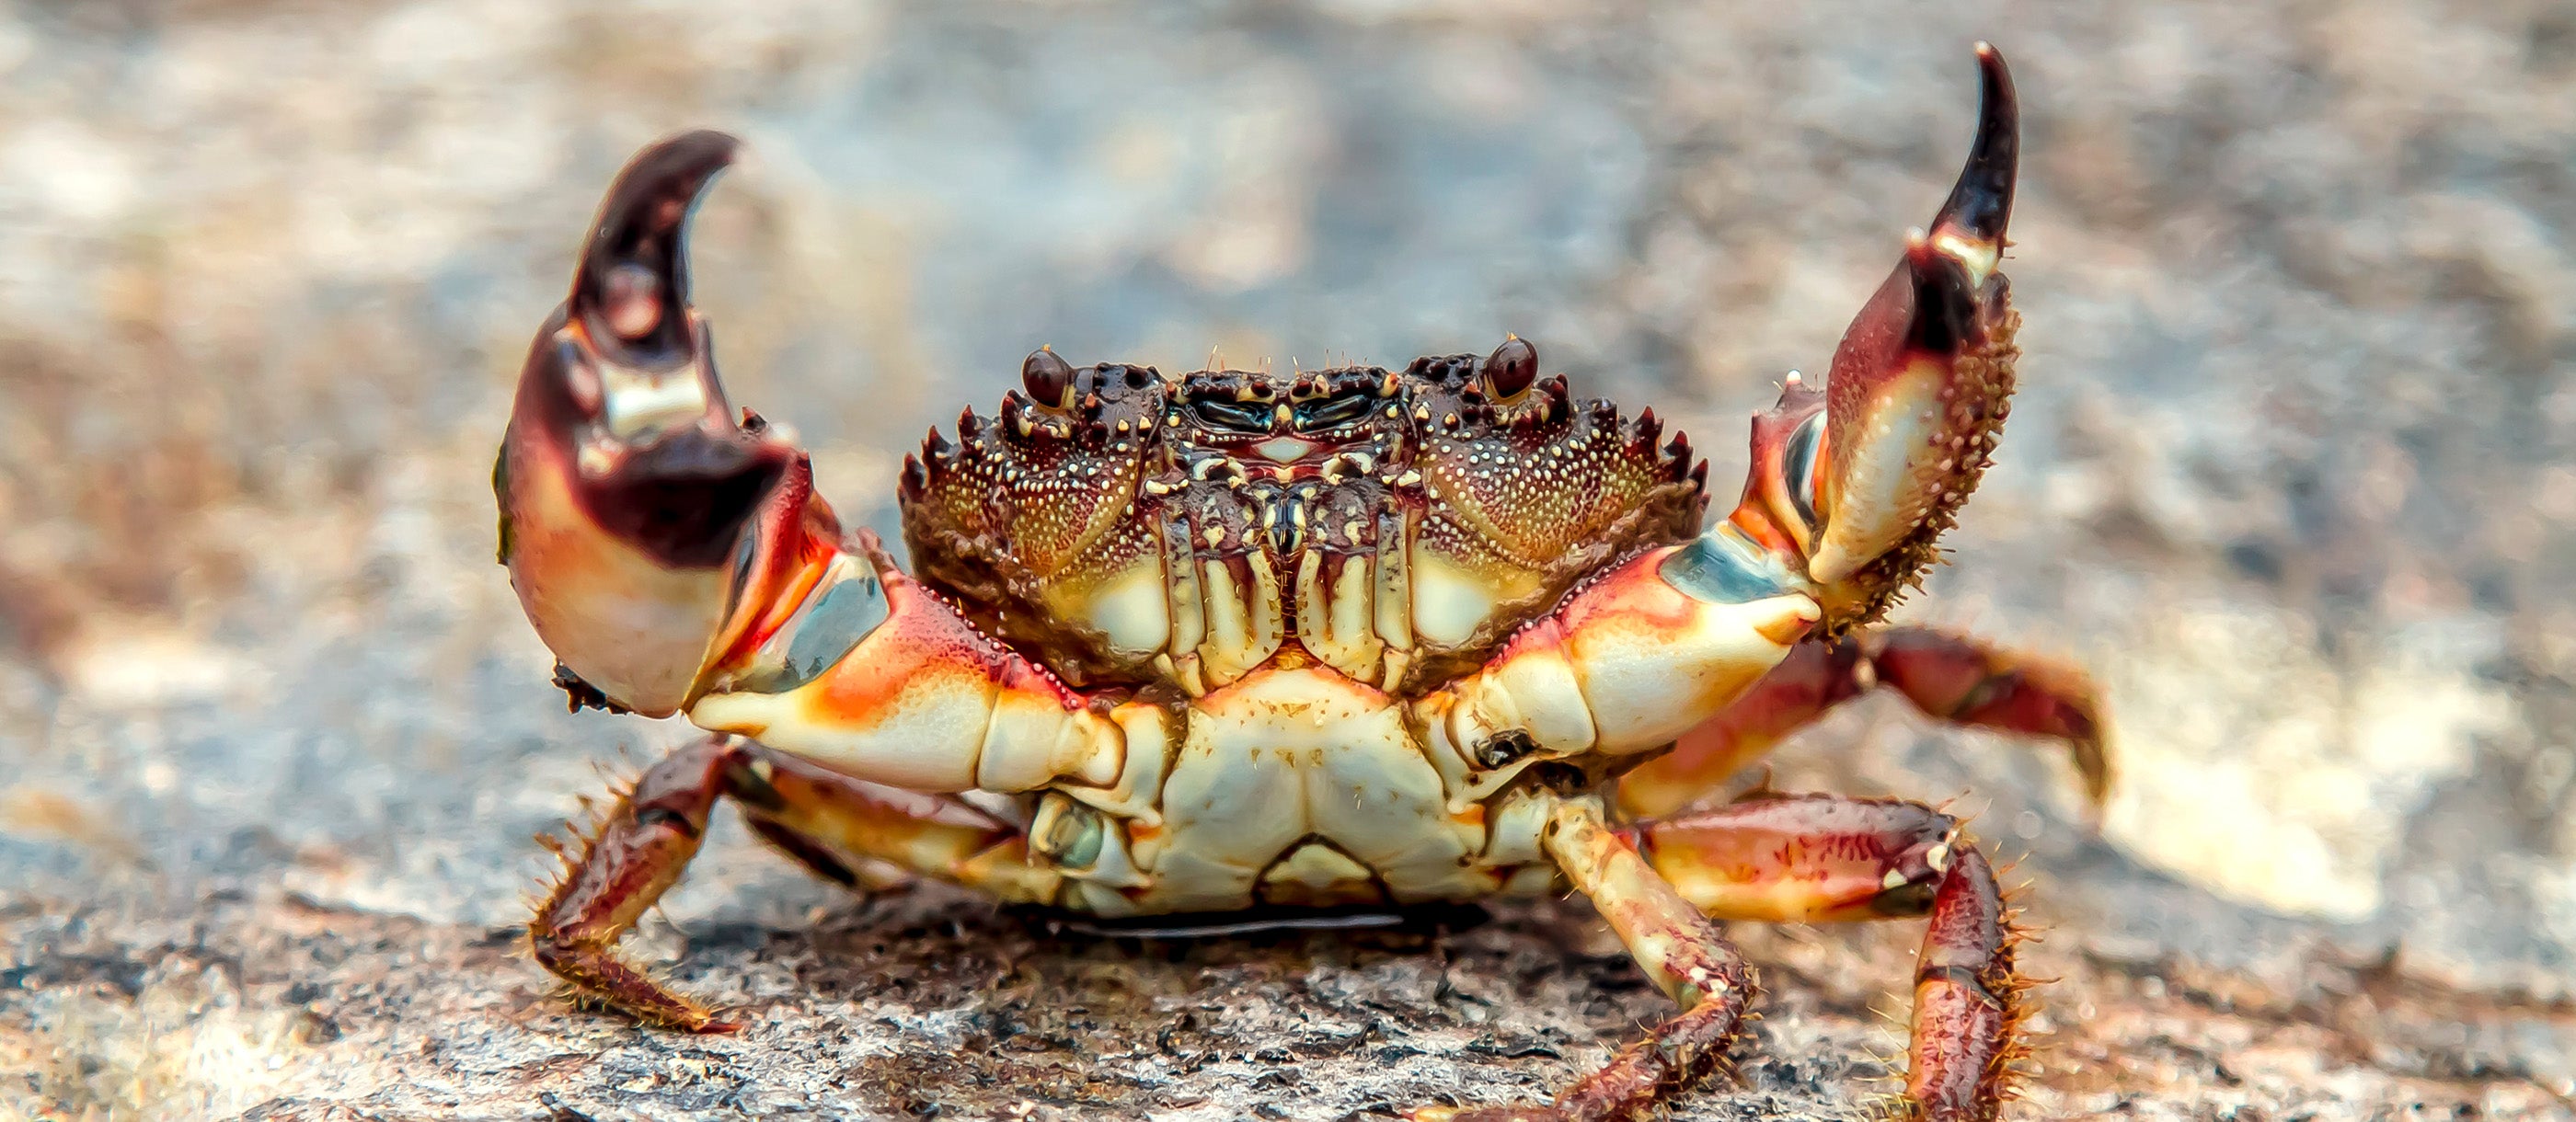 Interesting facts about what do crabs eat